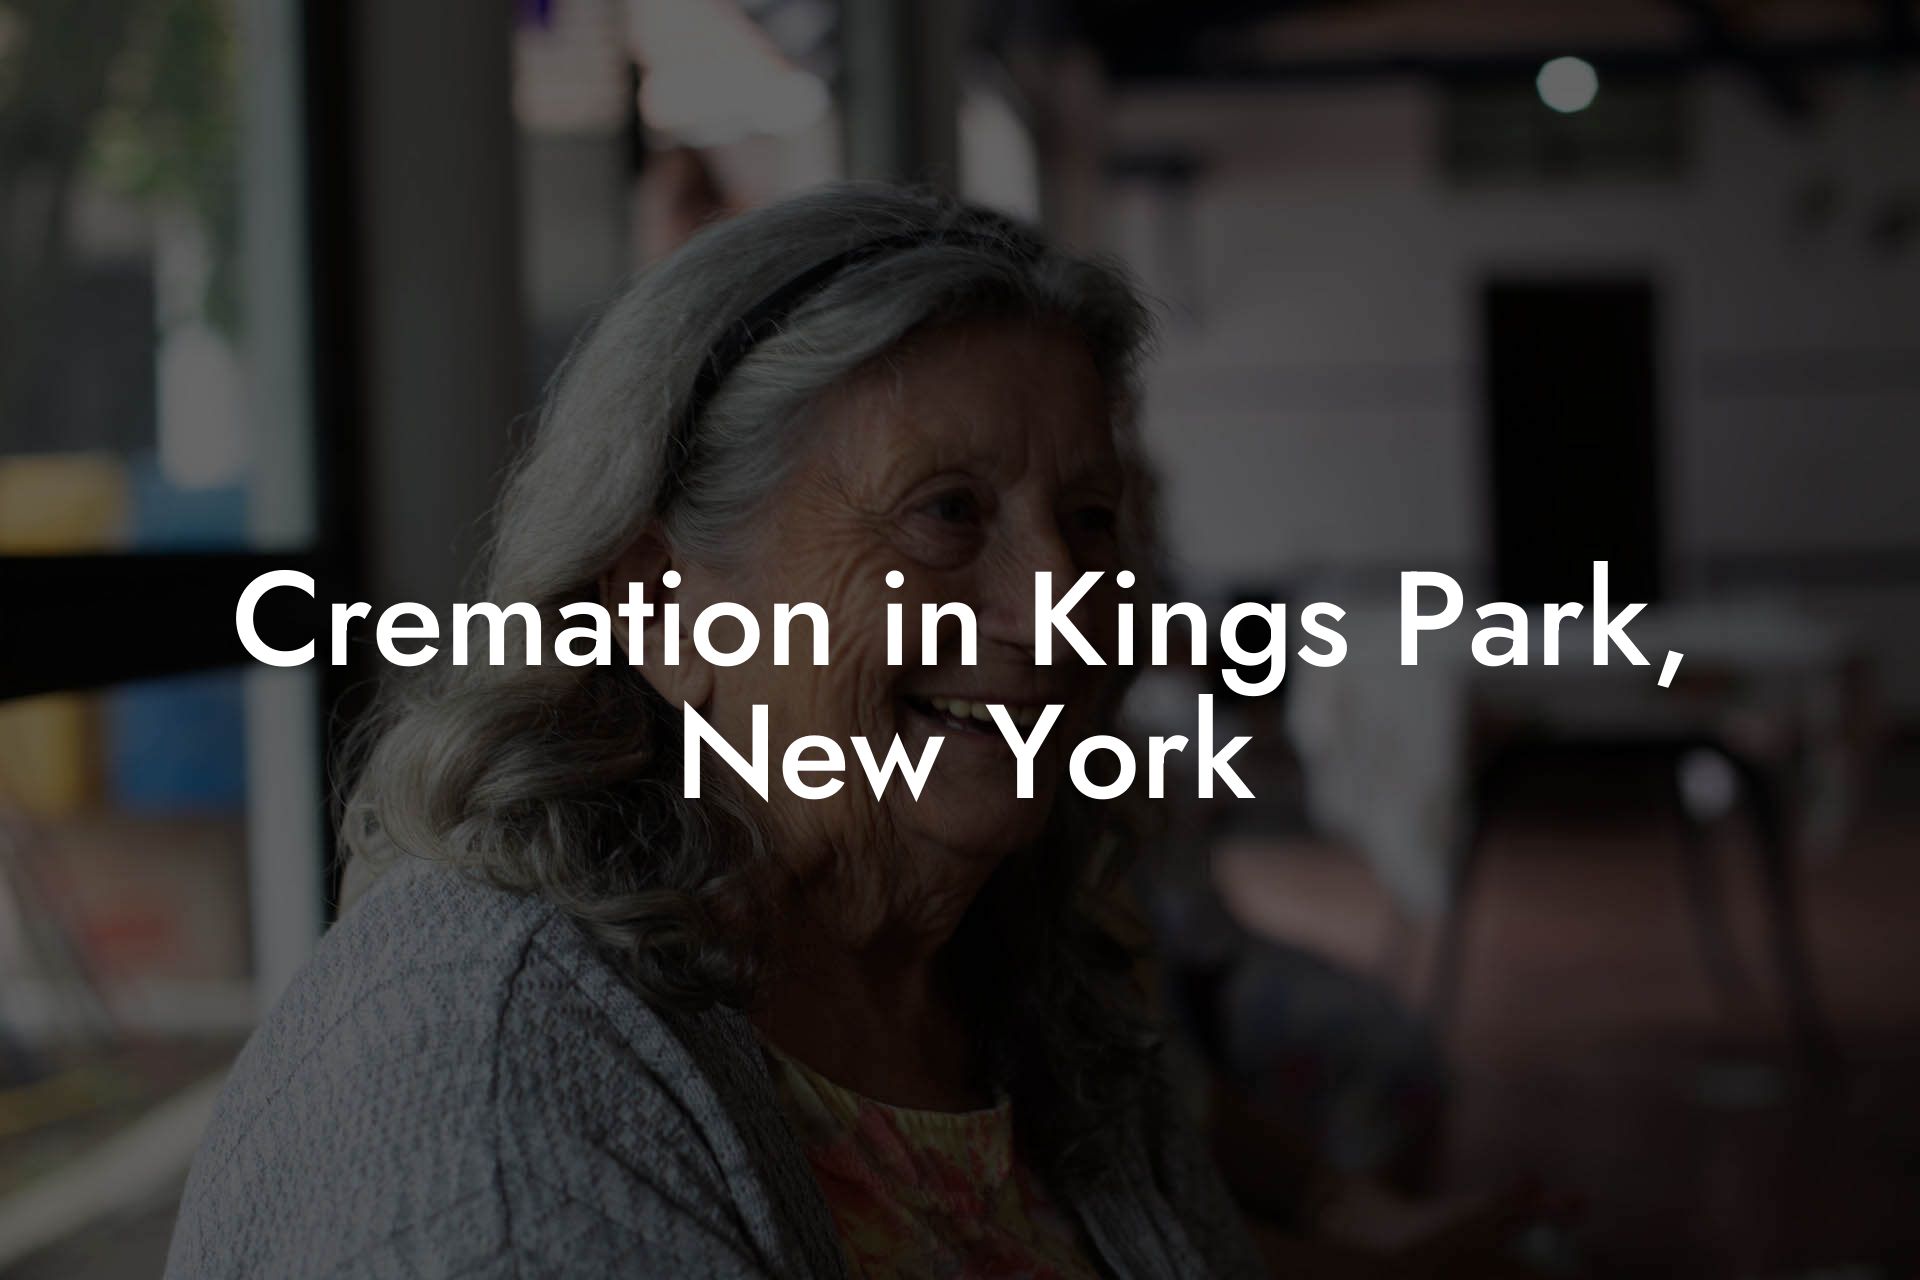 Cremation in Kings Park, New York